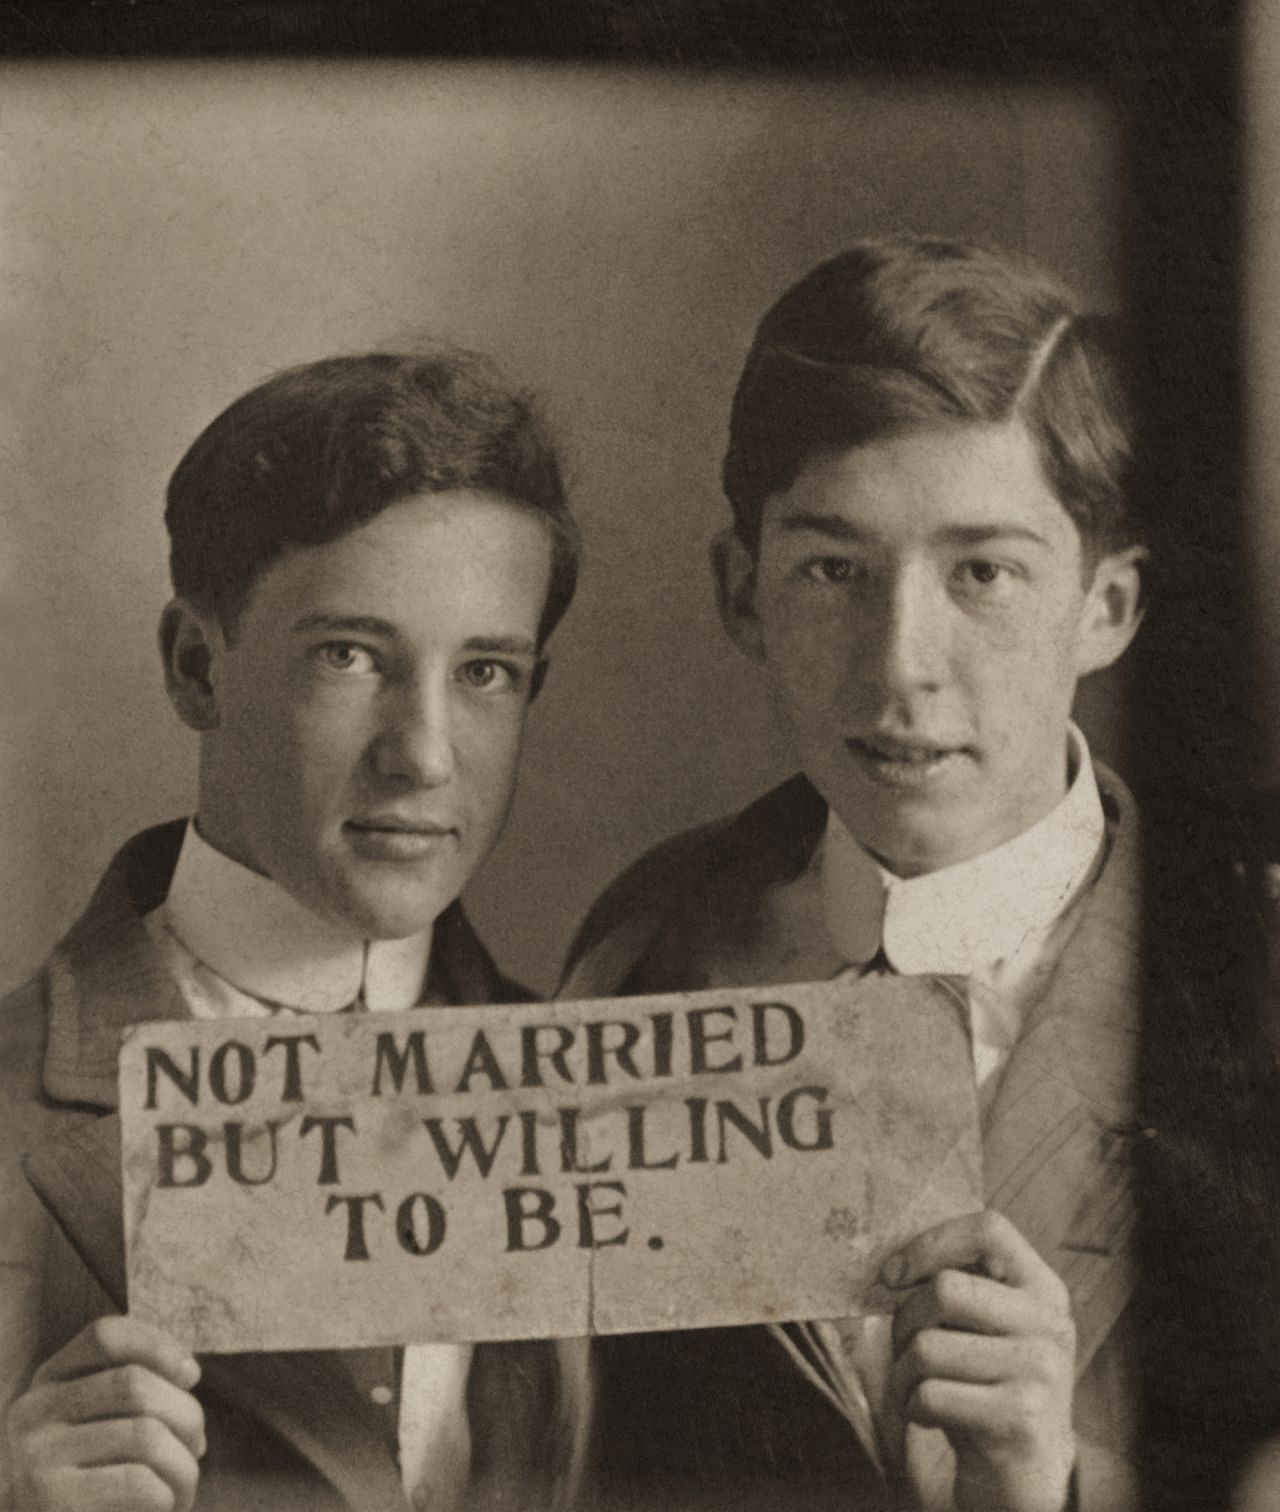 An image believed to be from the turn of the 20th century. Same-sex marriage was legalized in the United States more than 100 years later.